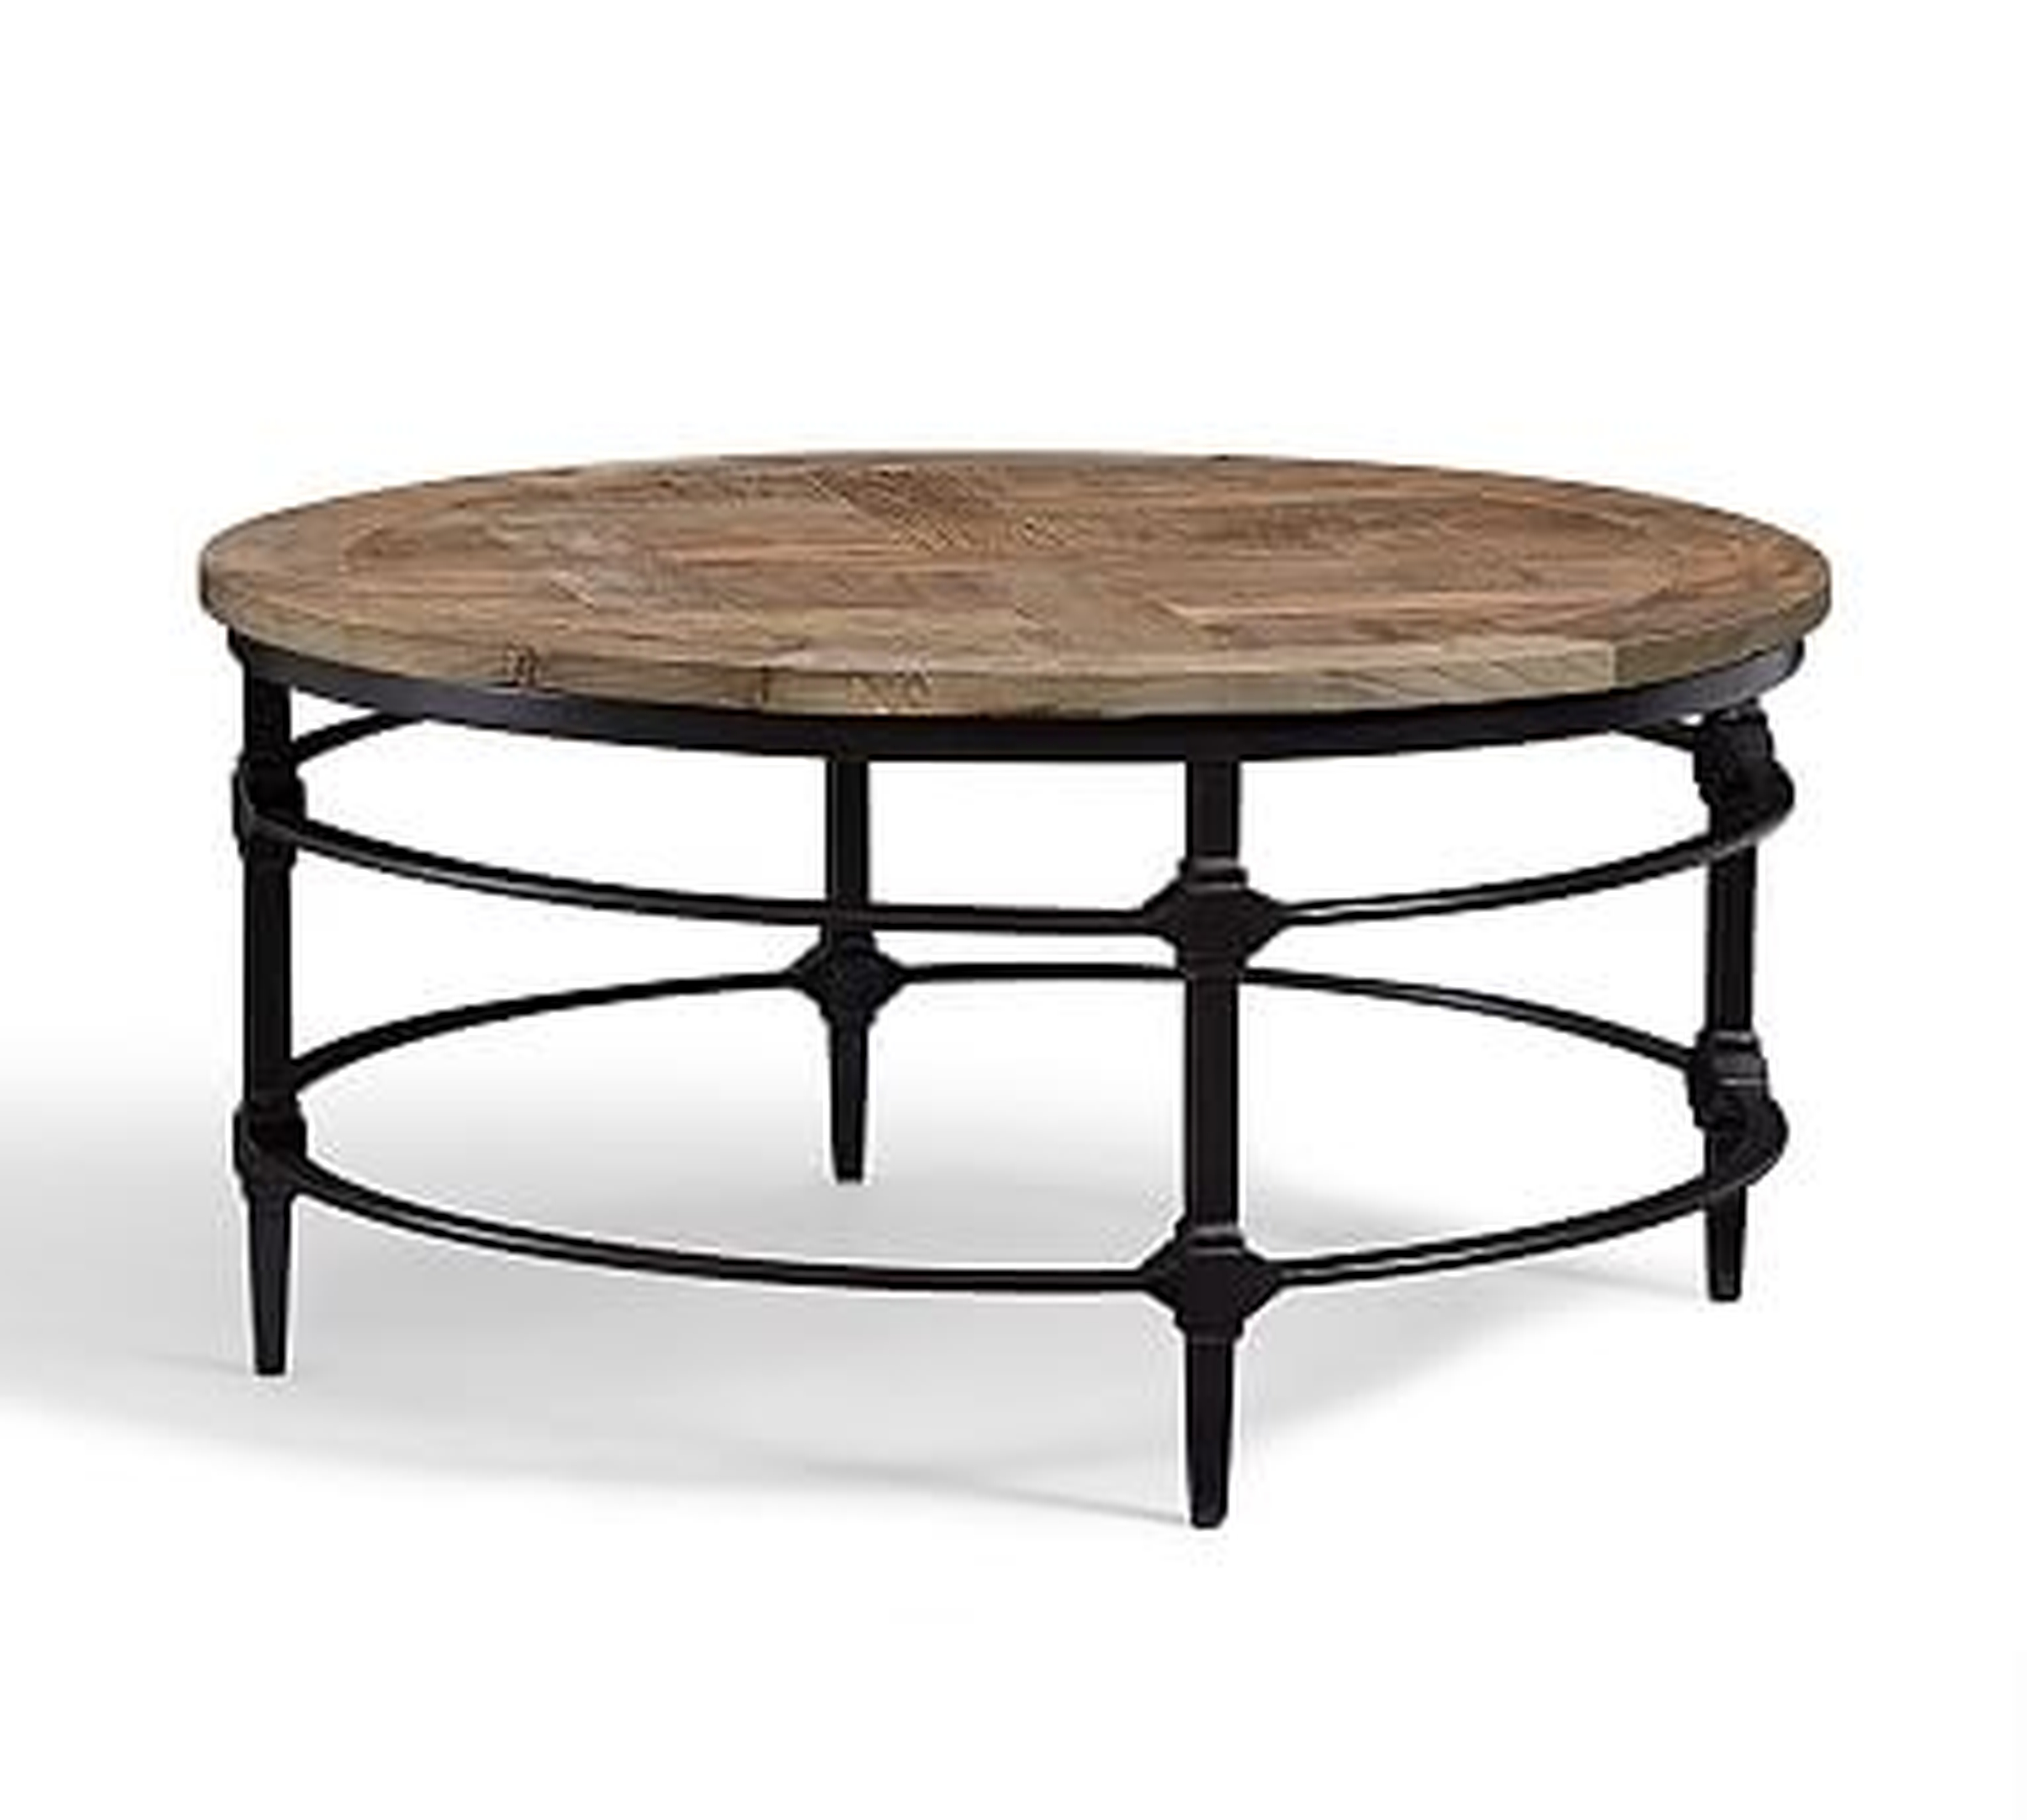 Parquet Reclaimed Wood Round Coffee Table - Pottery Barn